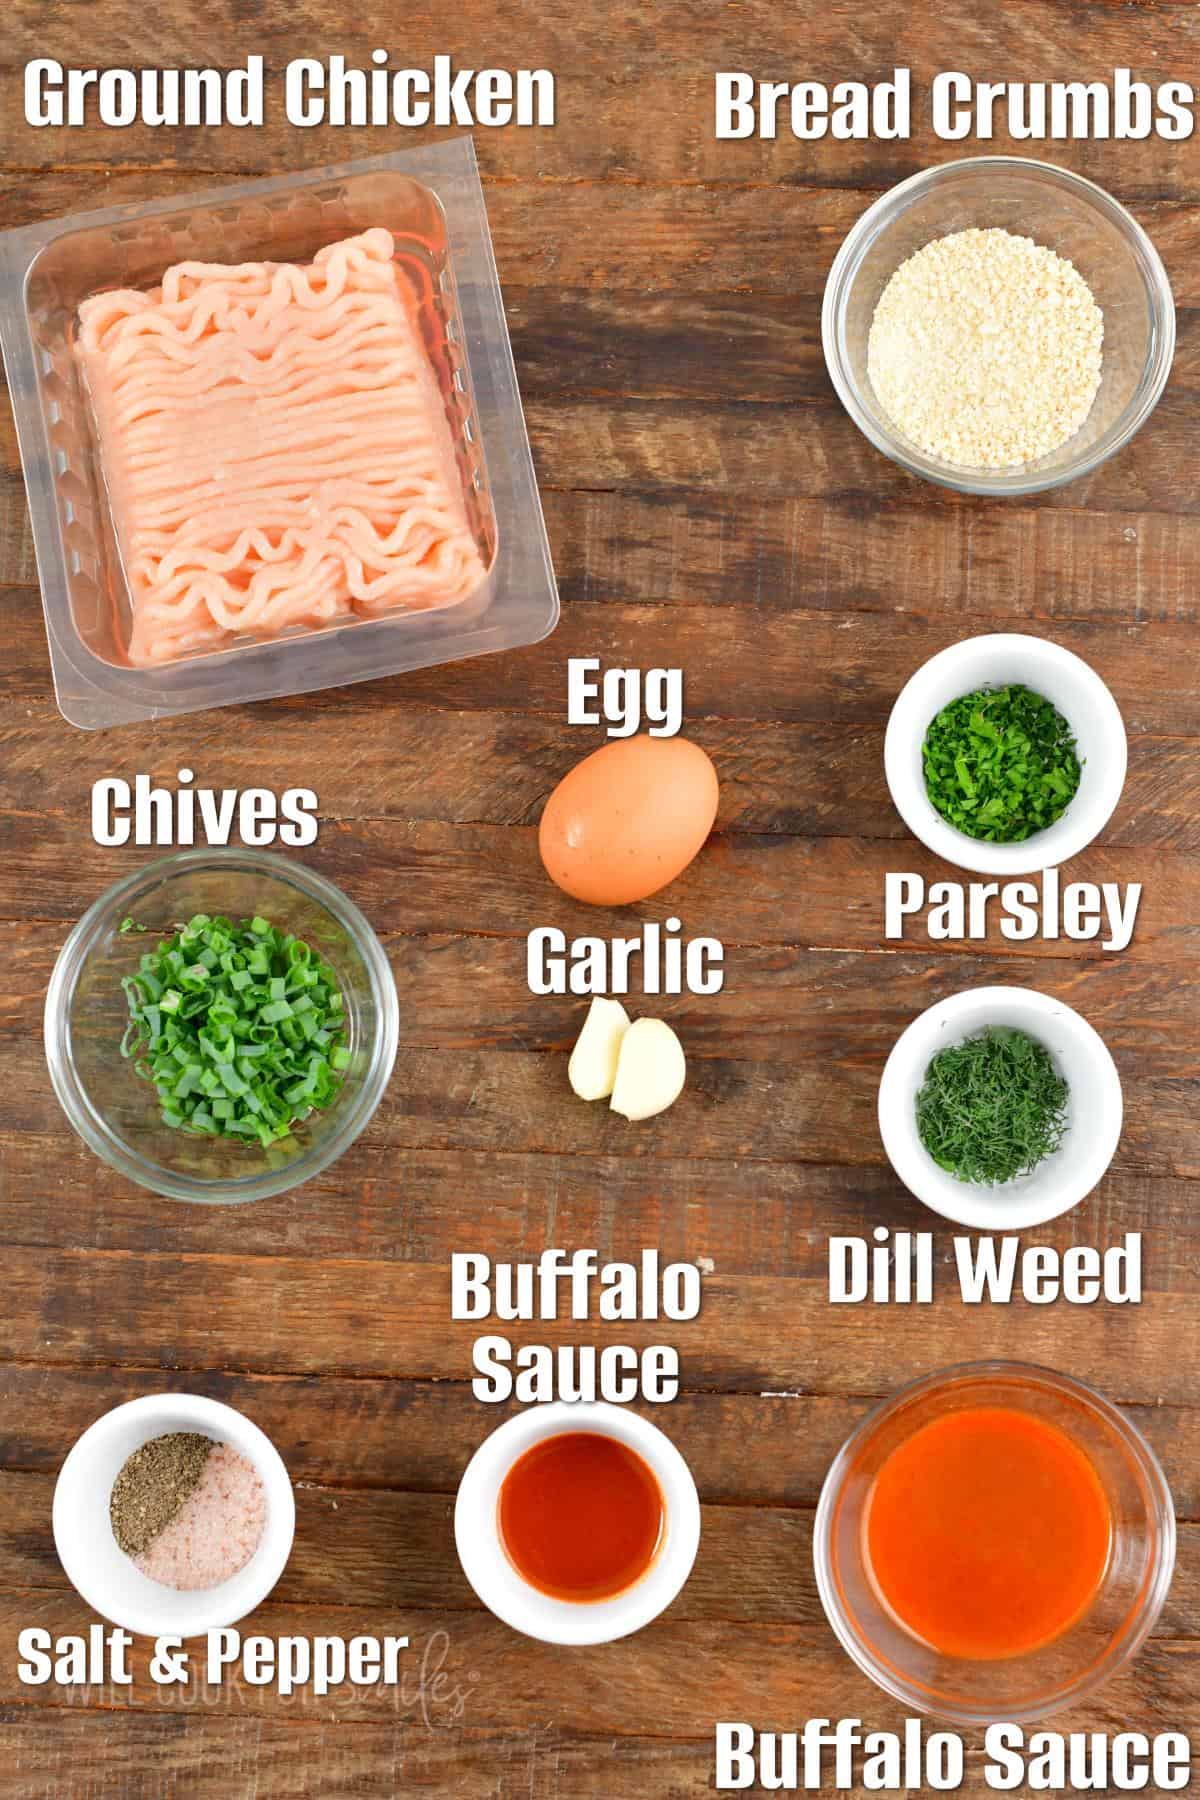 The ingredients for buffalo chicken burgers are placed on a wooden surface. 